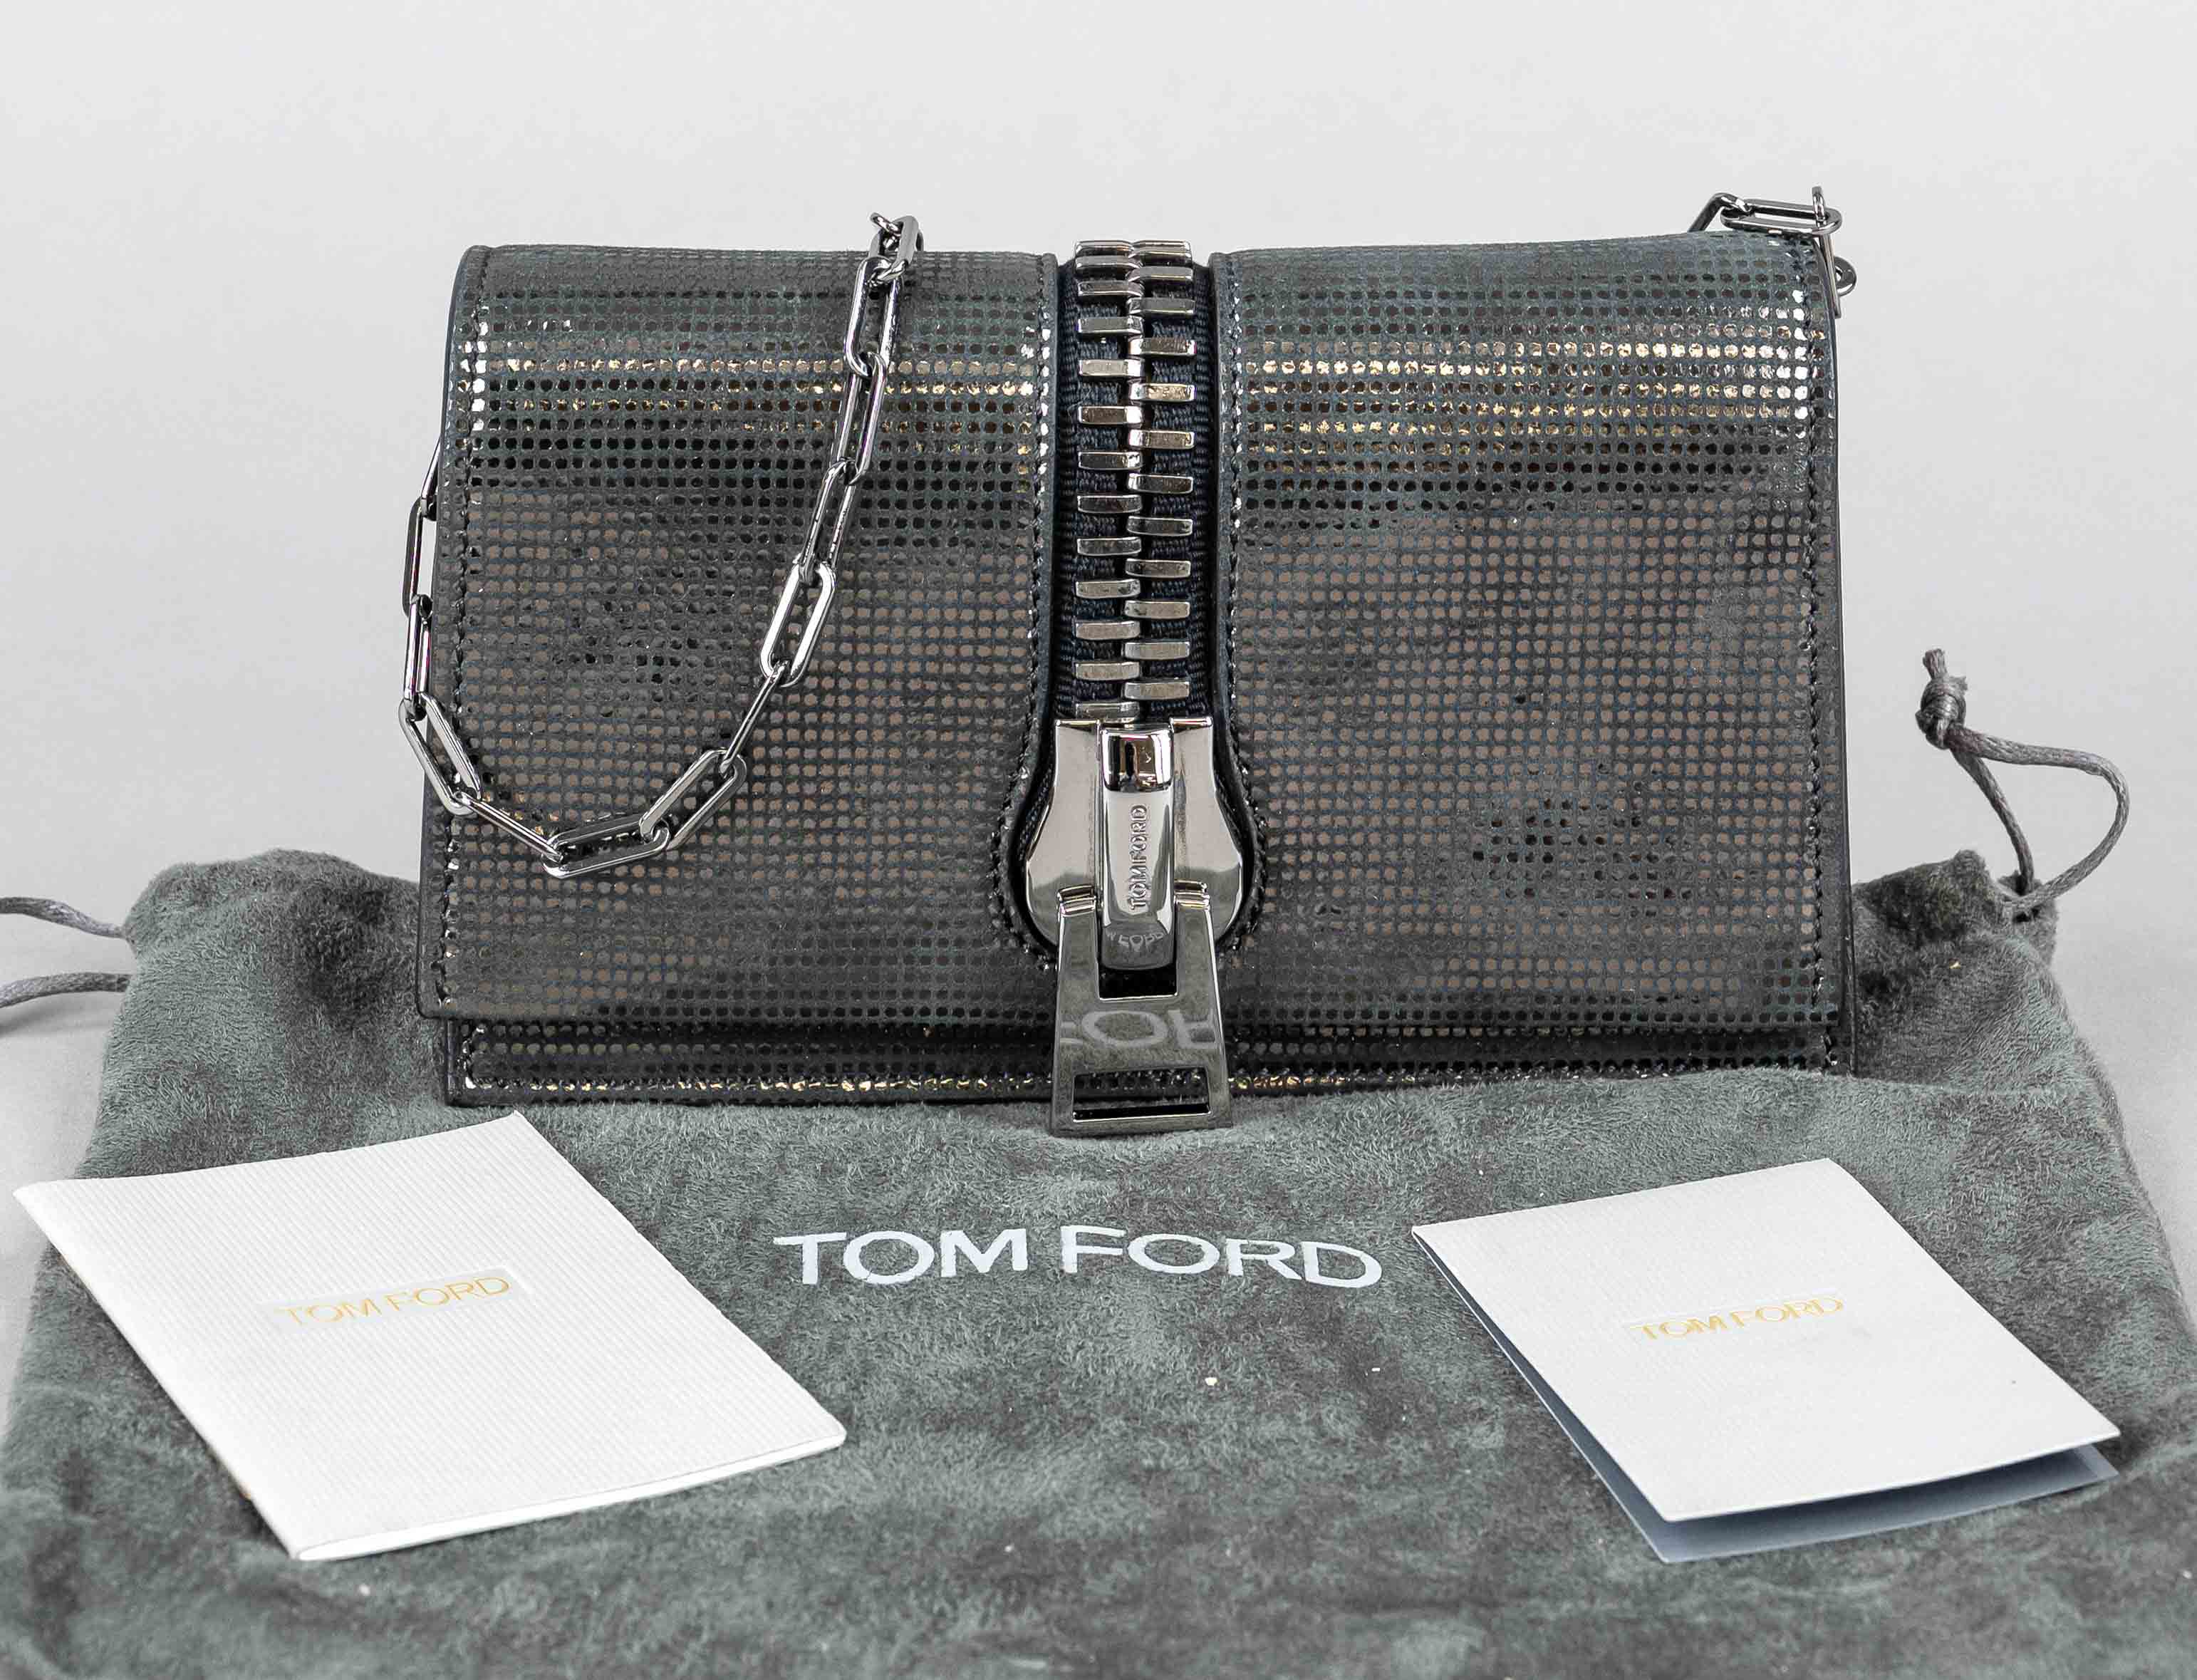 Tom Ford, Small Zip Front Leather Shoulder Bag, textured black anthracite leather with metallic